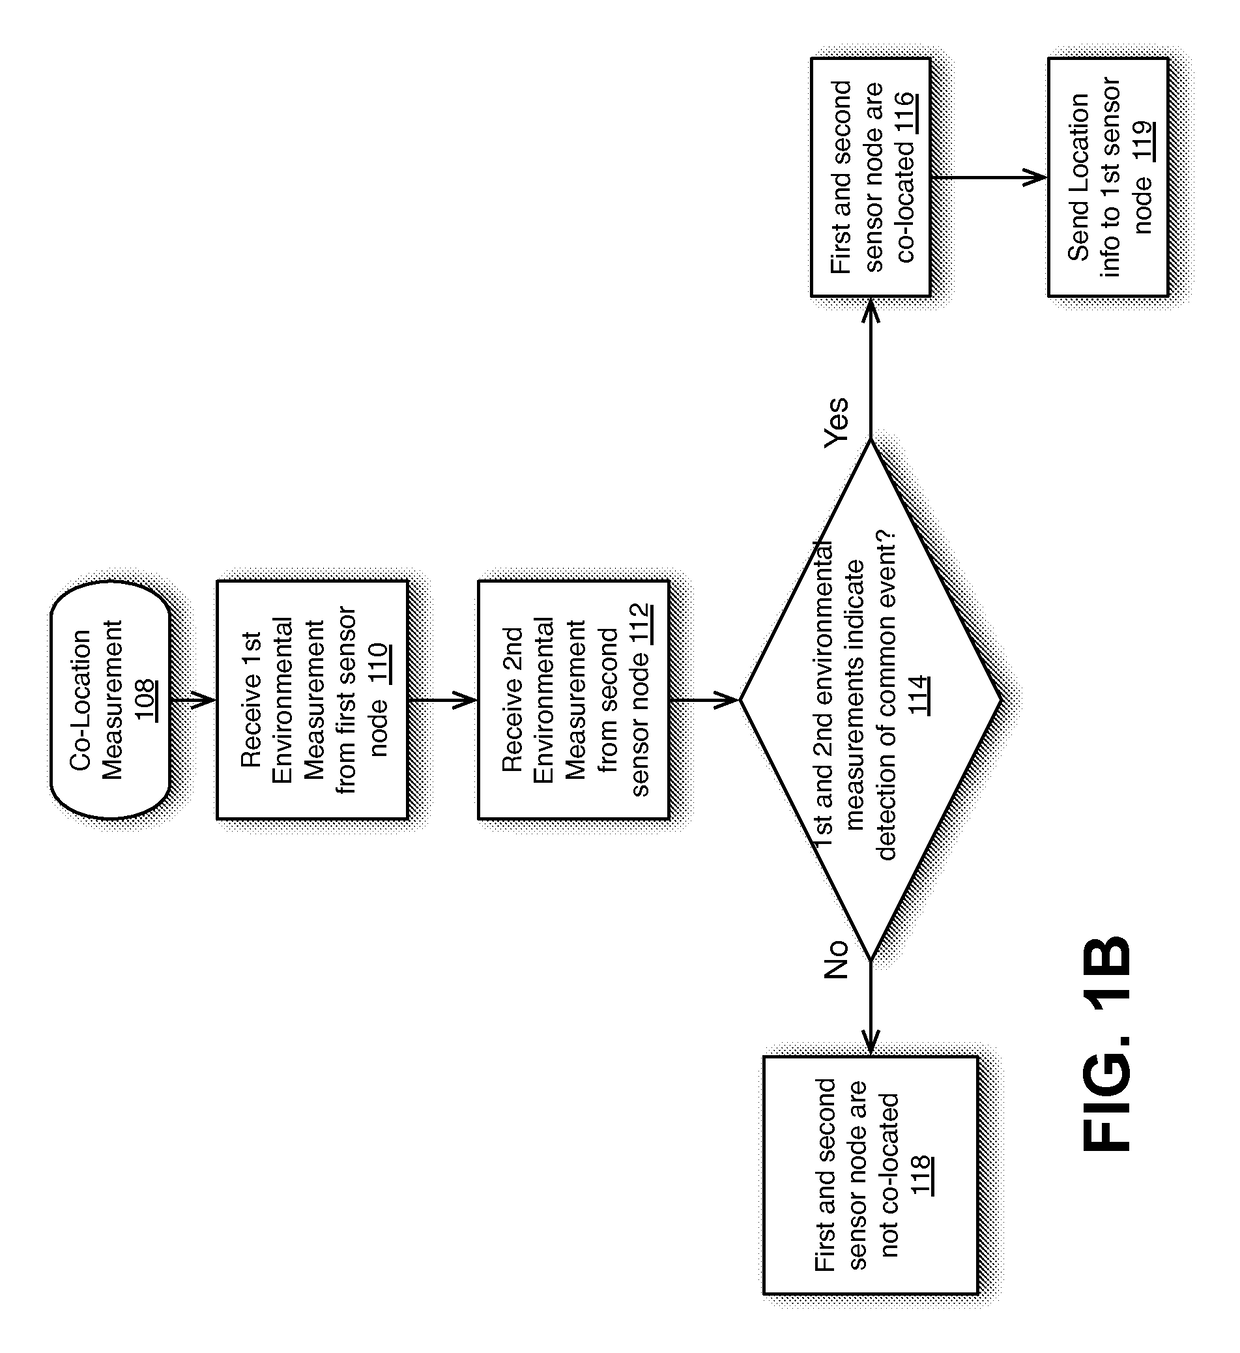 System and method for sensor network organization based on contextual event detection